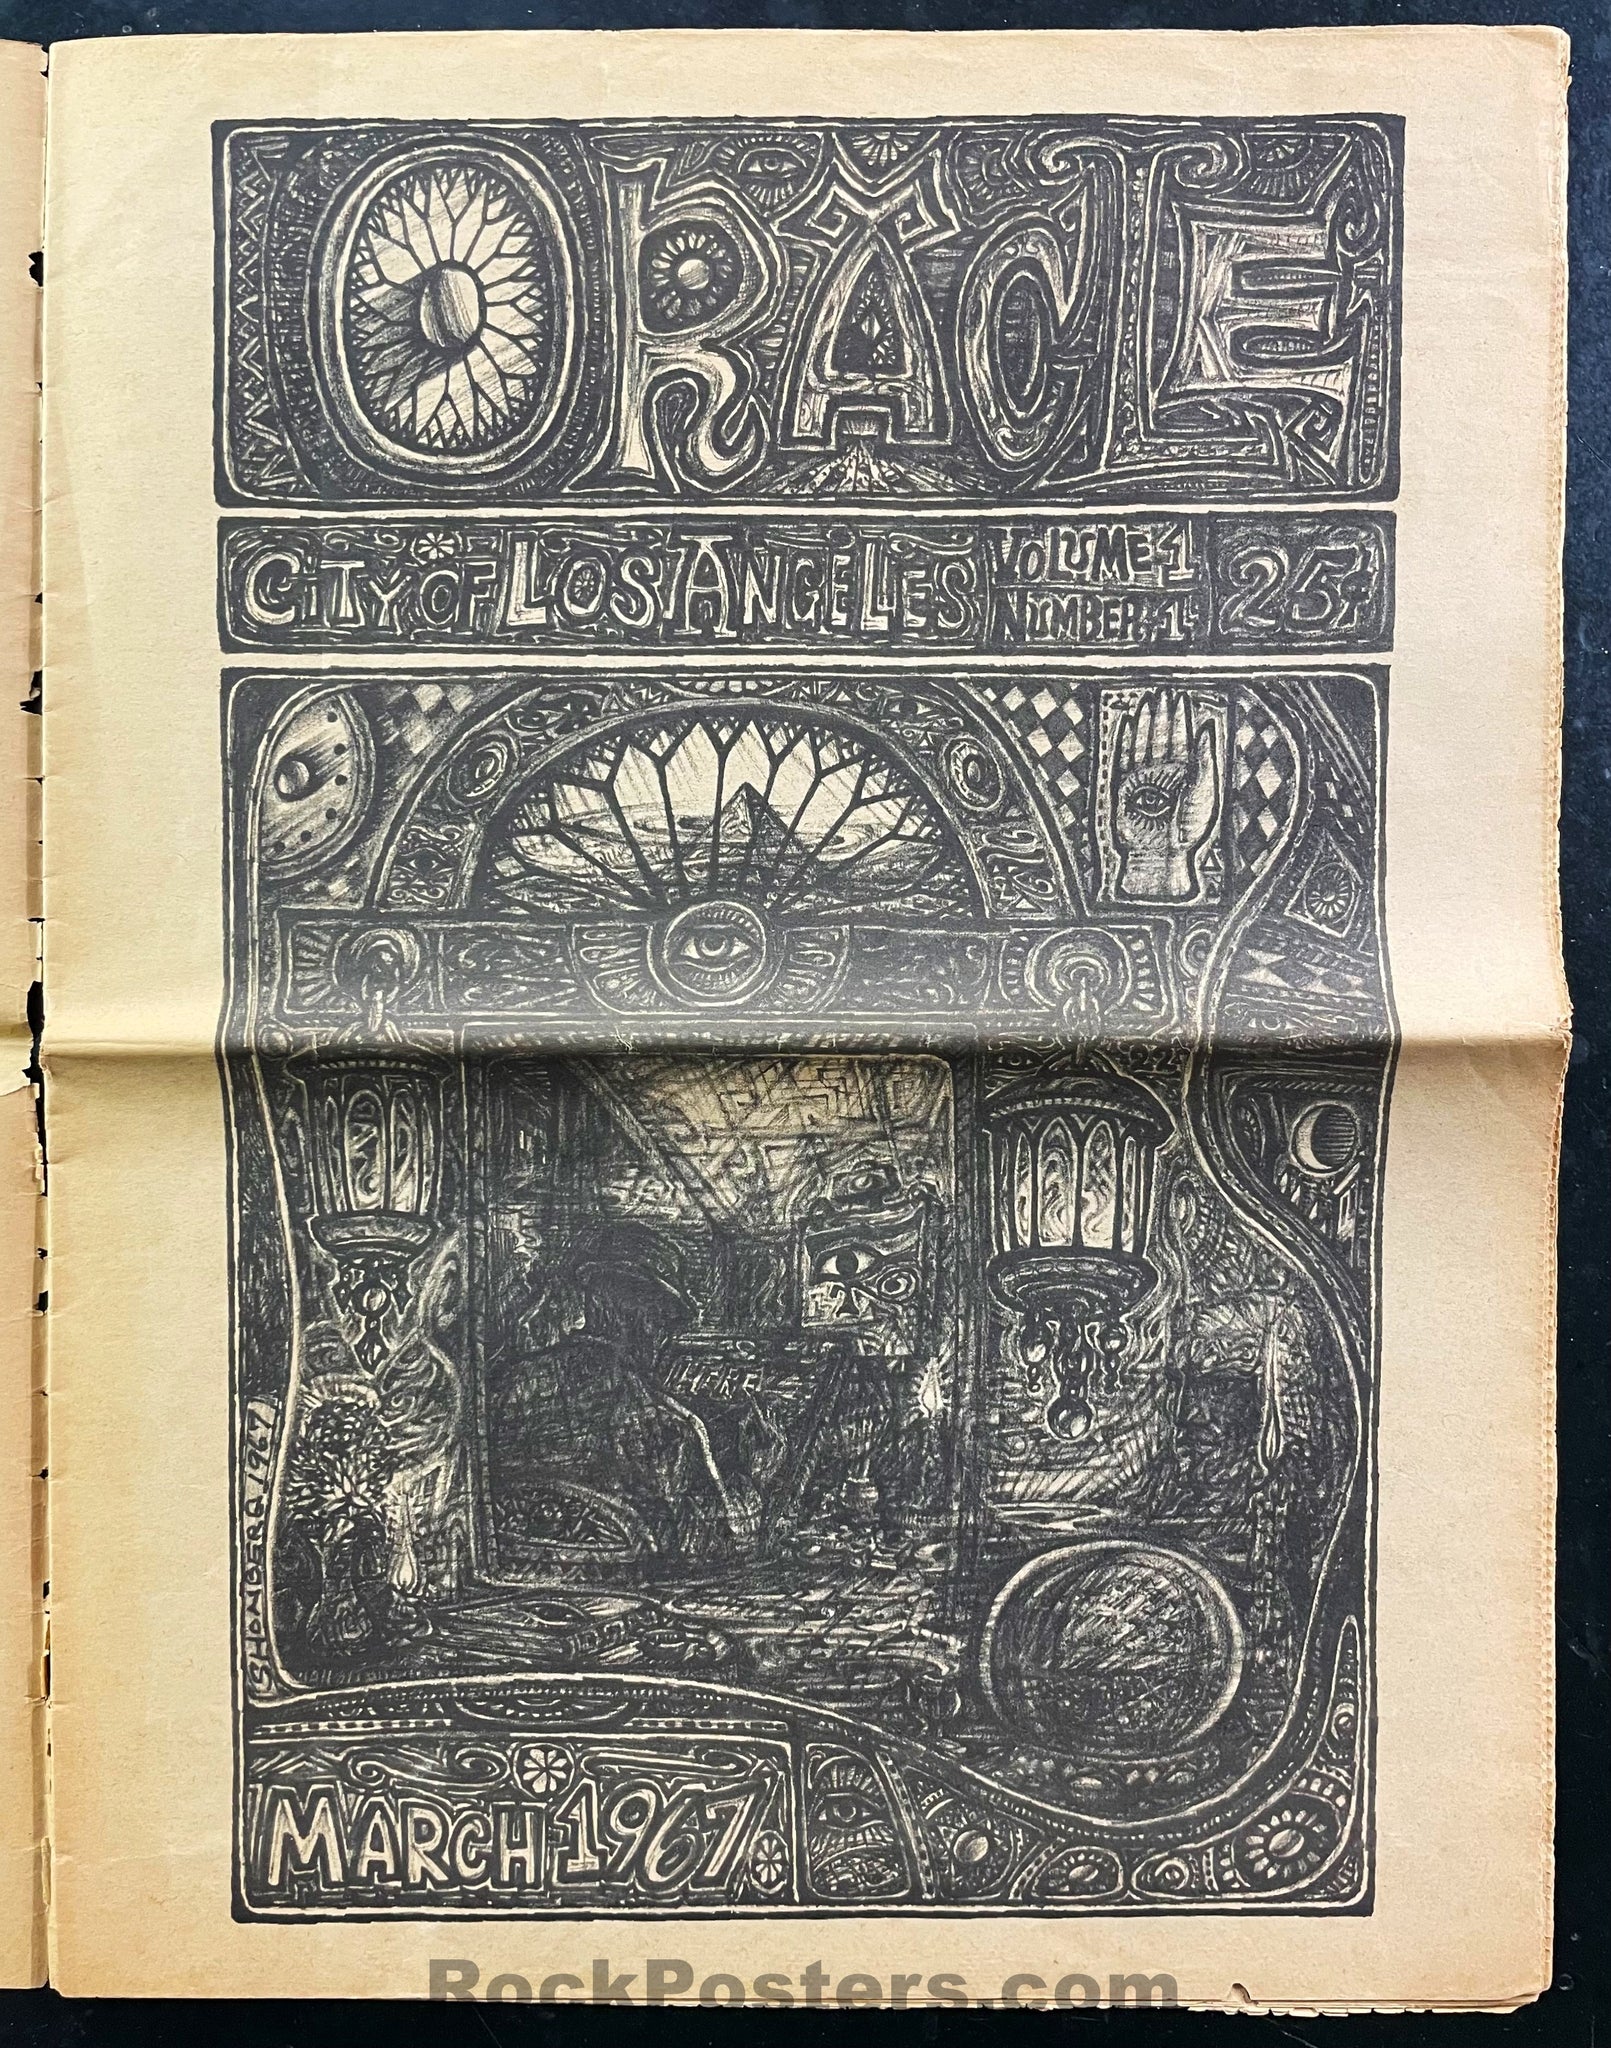 AUCTION - Southern California Oracle - Very First Issue - 1967 - Underground Newspaper - Very Good